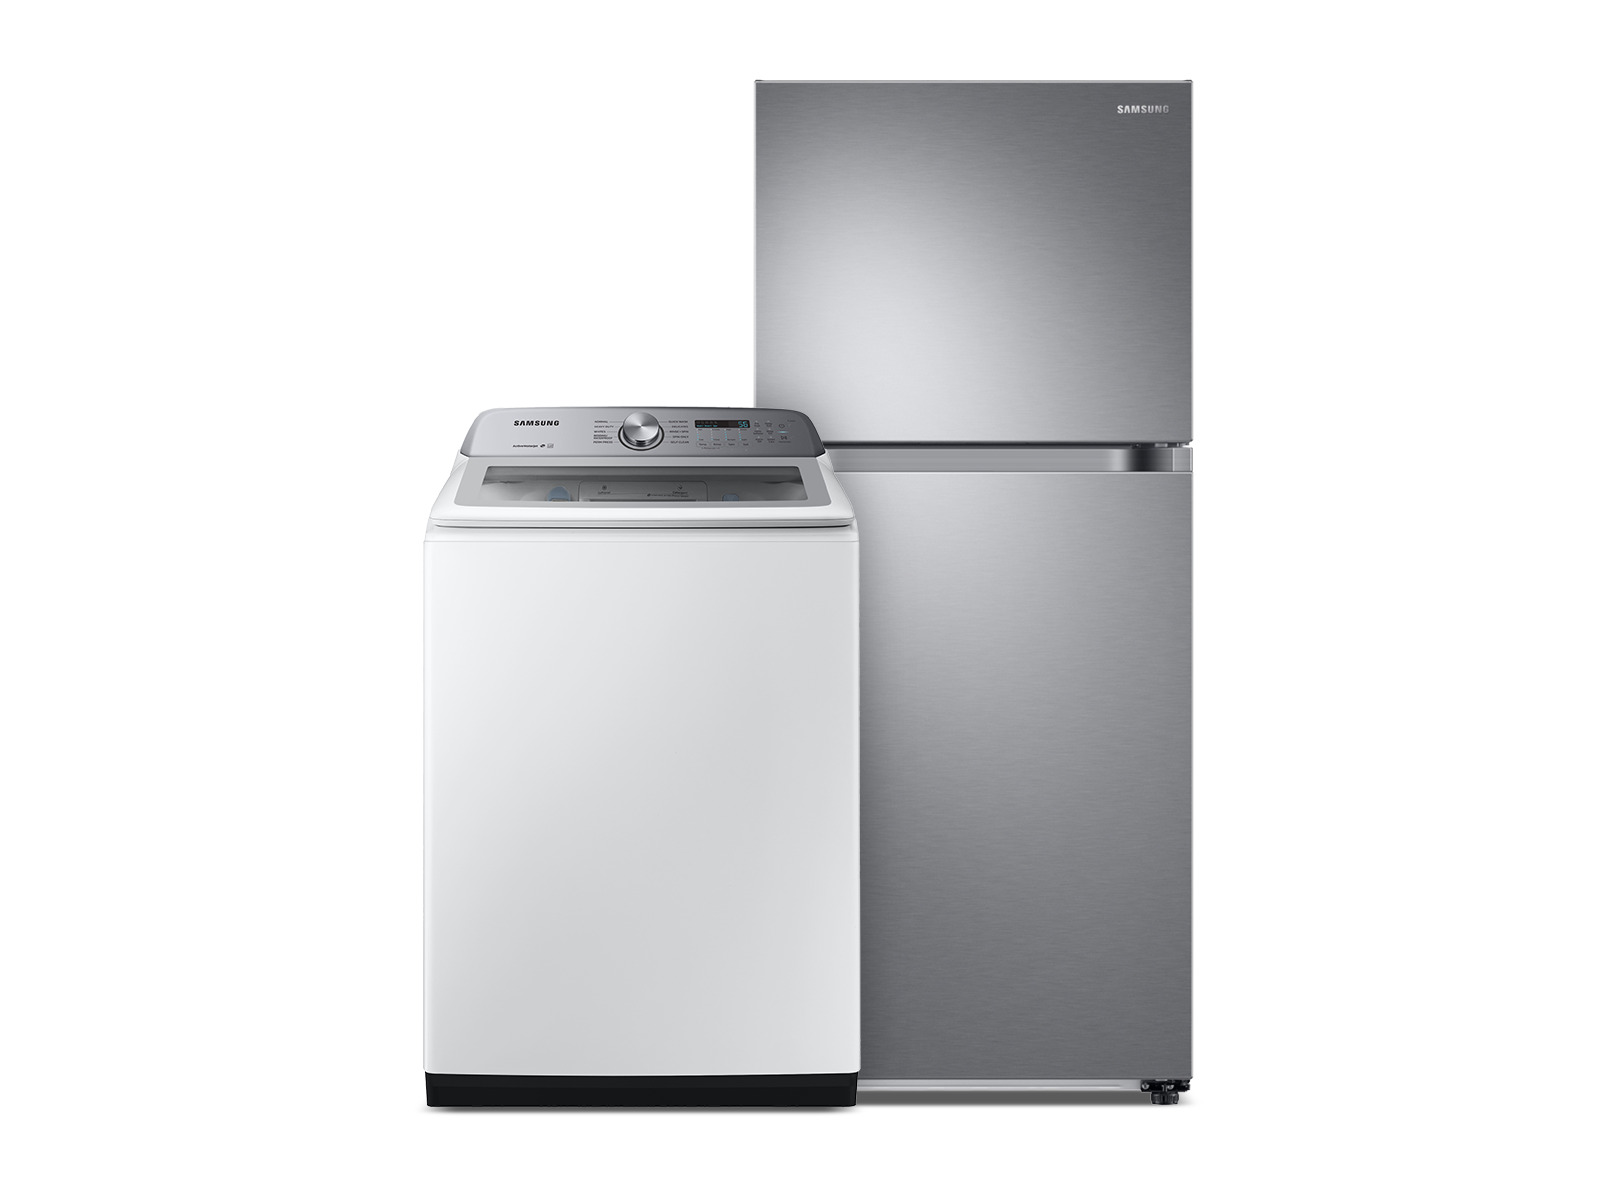 Samsung Large Capacity Top Load Washer with Active WaterJet & Top Freezer Refrigerator with FlexZone and Ice Maker